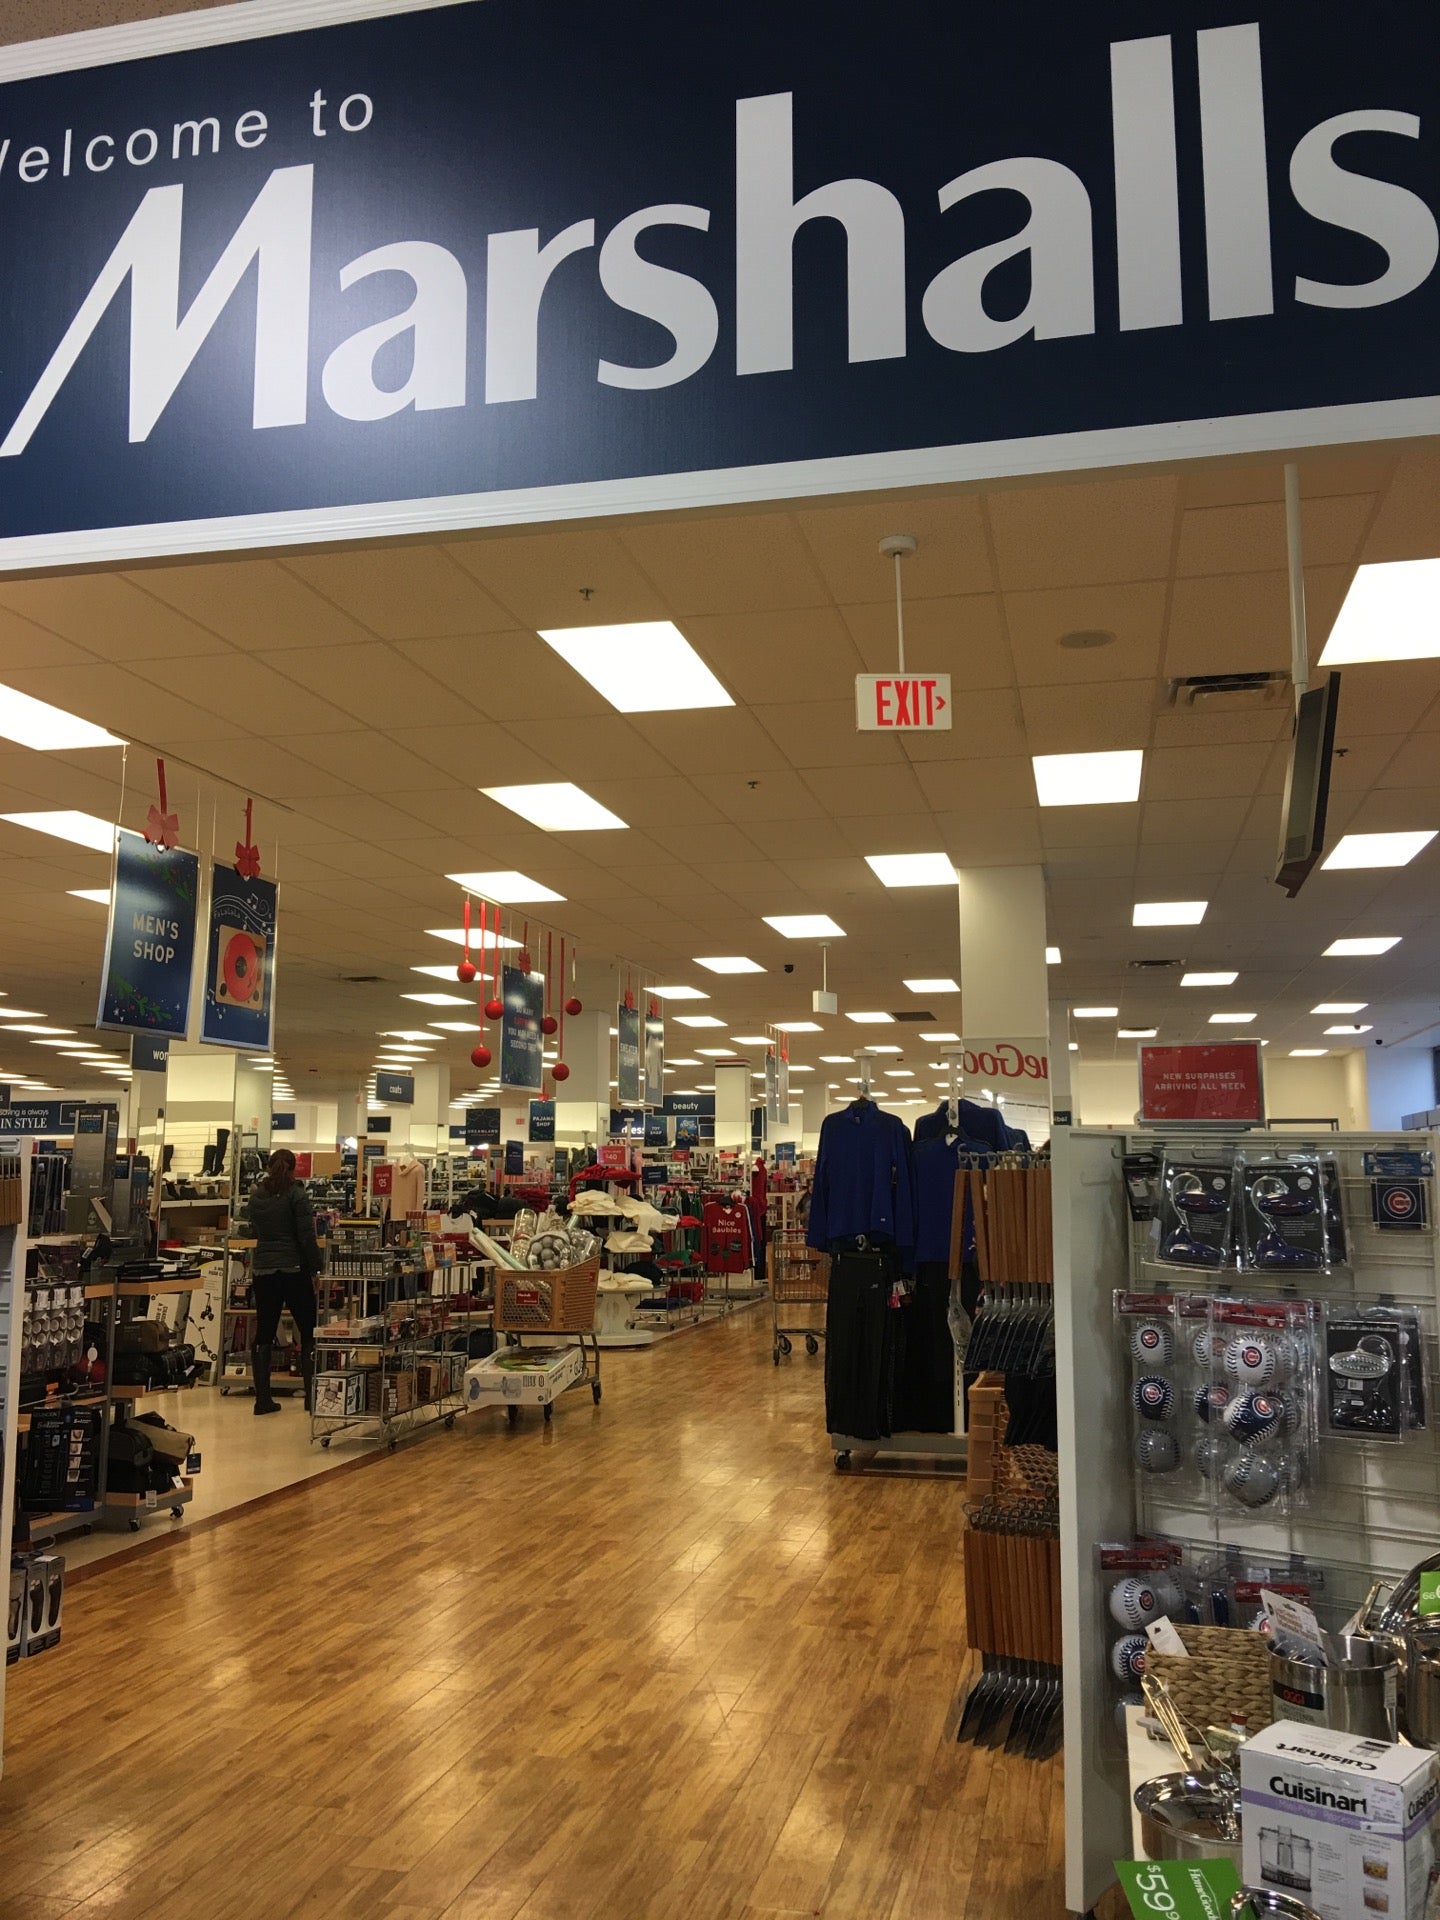 Come Shop With Me: High End Makeup Deals at Marshalls for a WEEK